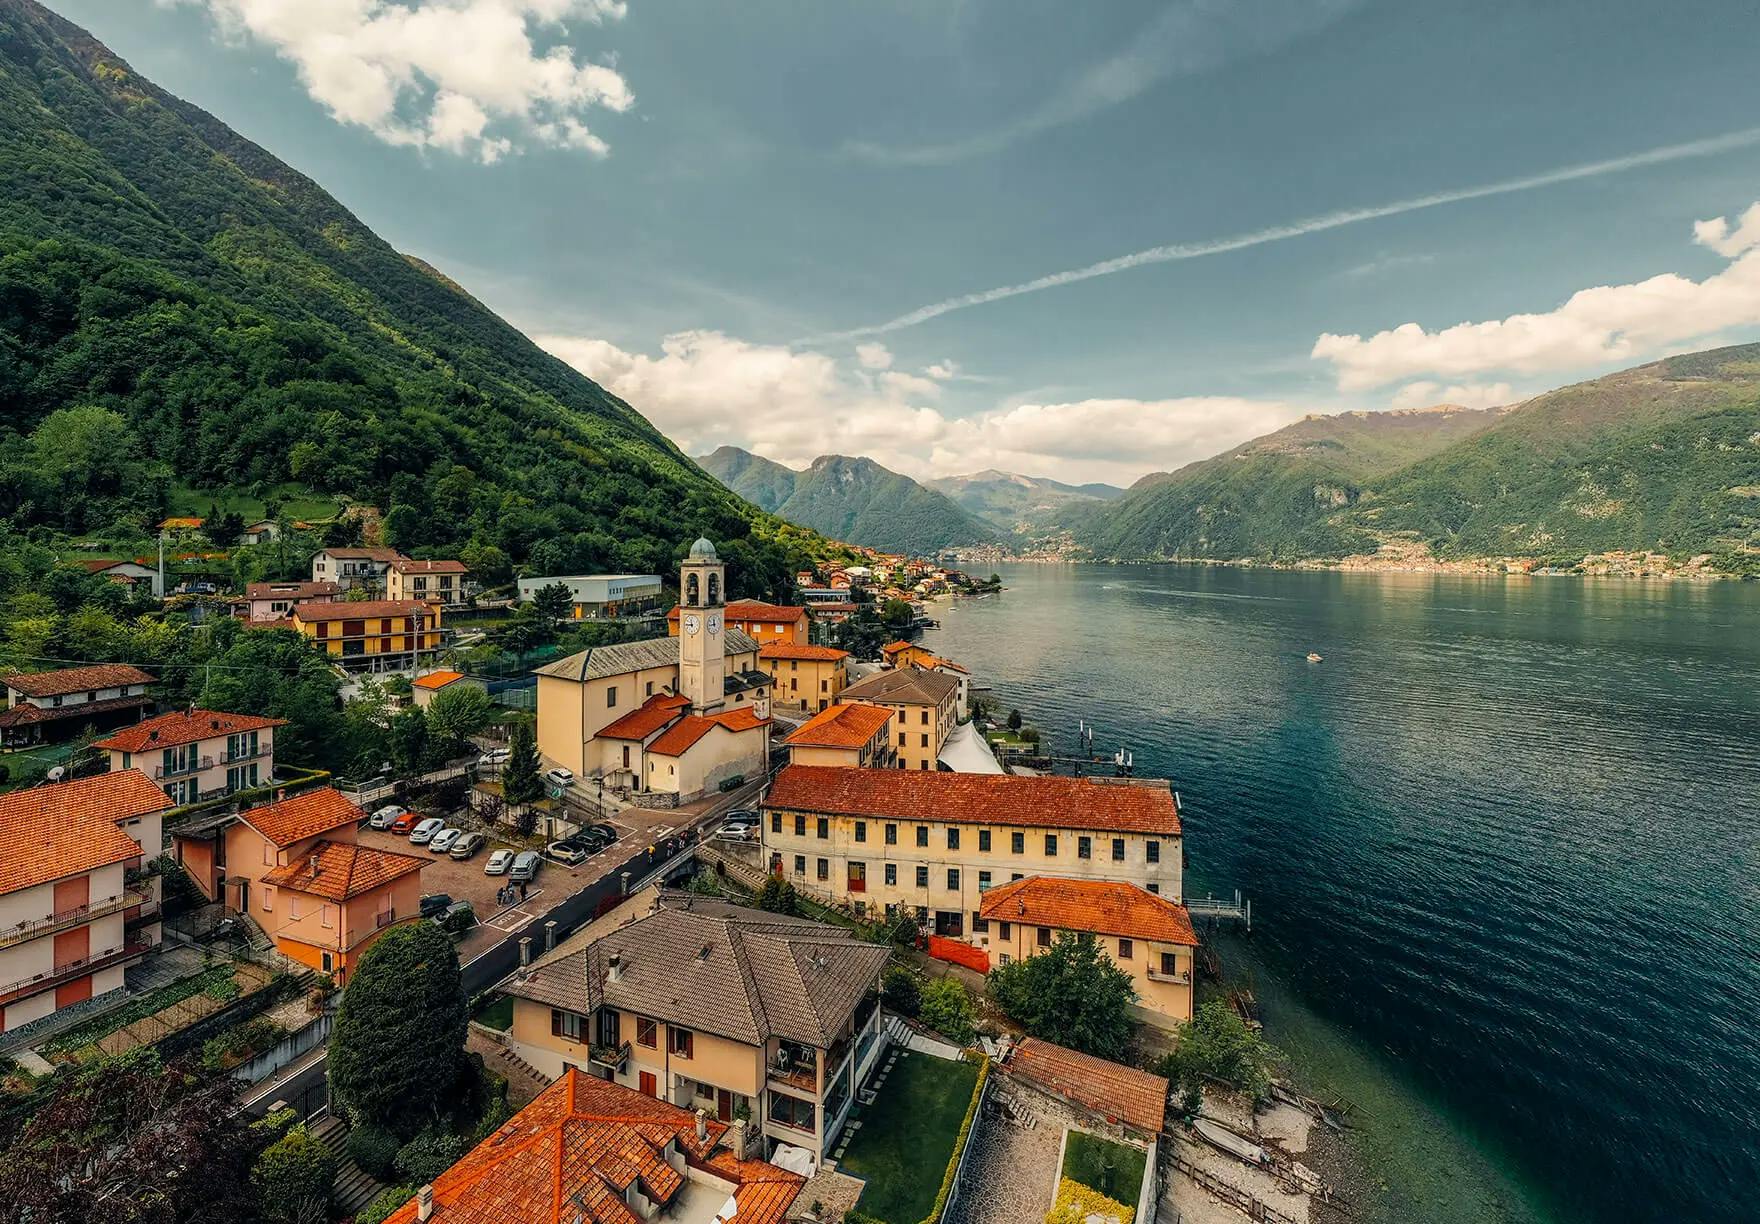 An image of Lake Como in Italy